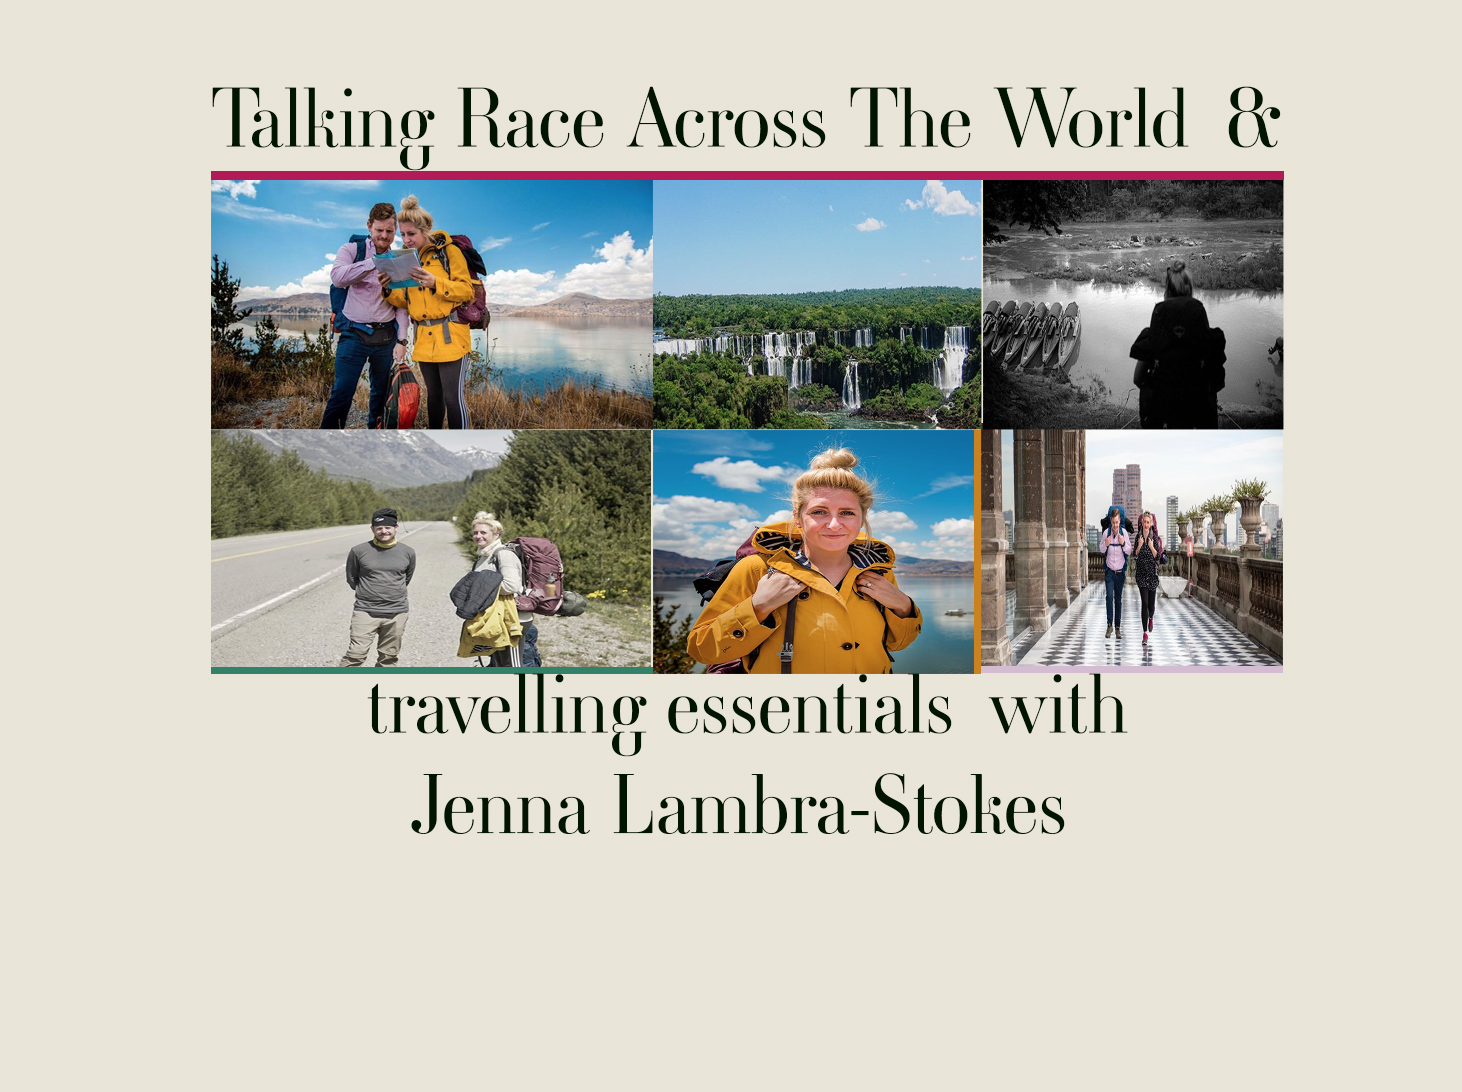 Q&A:Talking race across the world & travelling essentials with Jenna Lambra-Stokes.